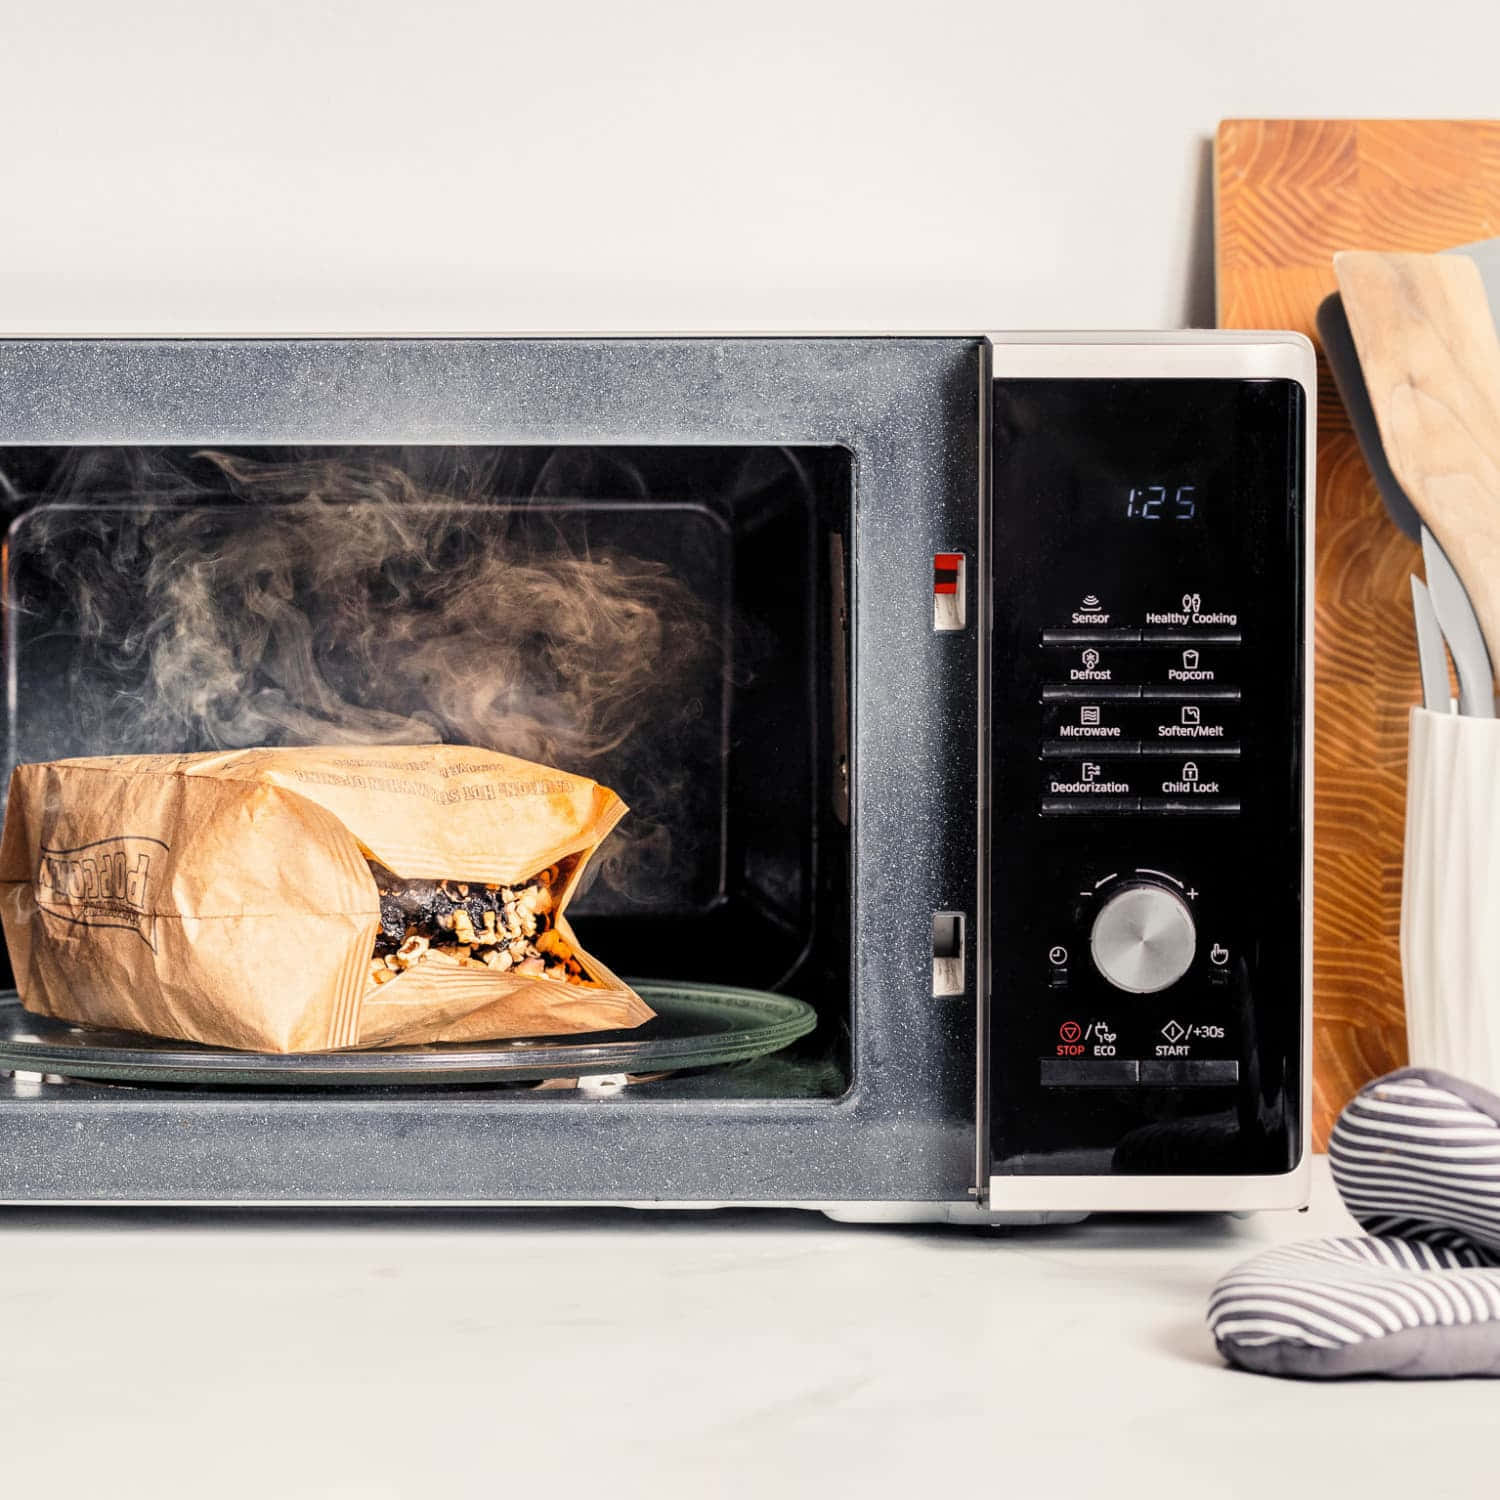 A Microwave With A Bag Of Food In It